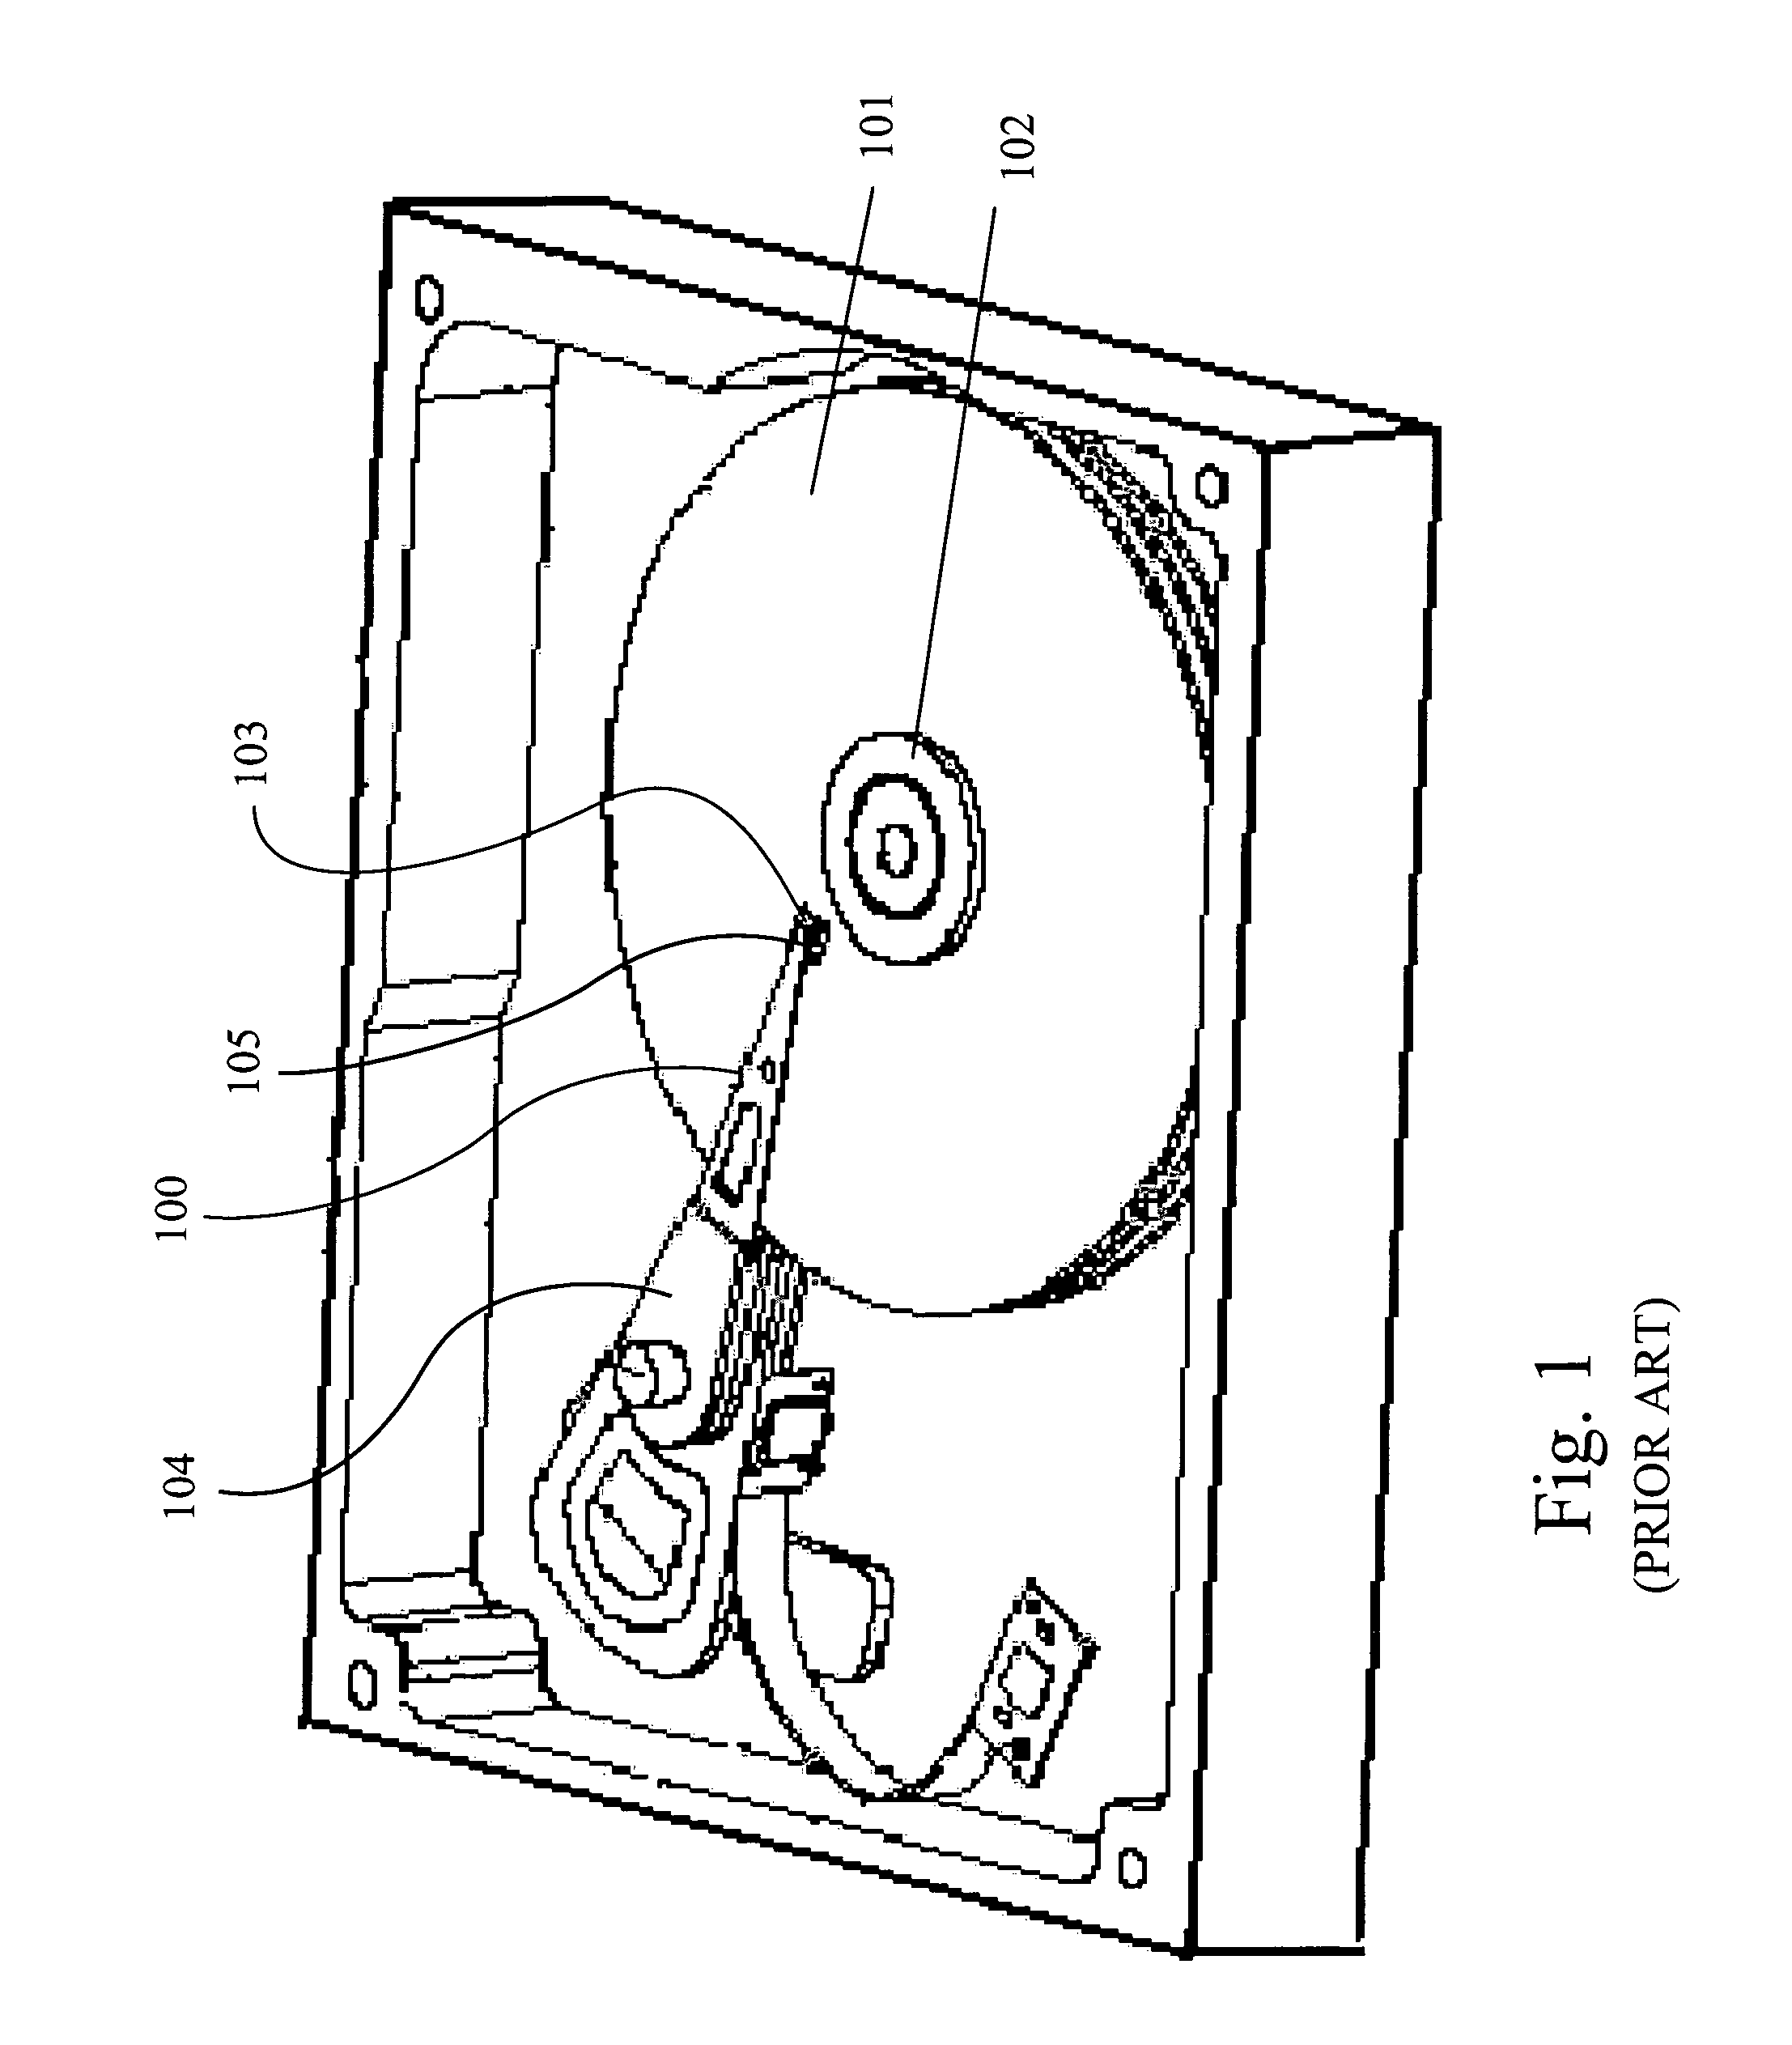 Micro-actuator and head gimbal assembly for a disk drive device